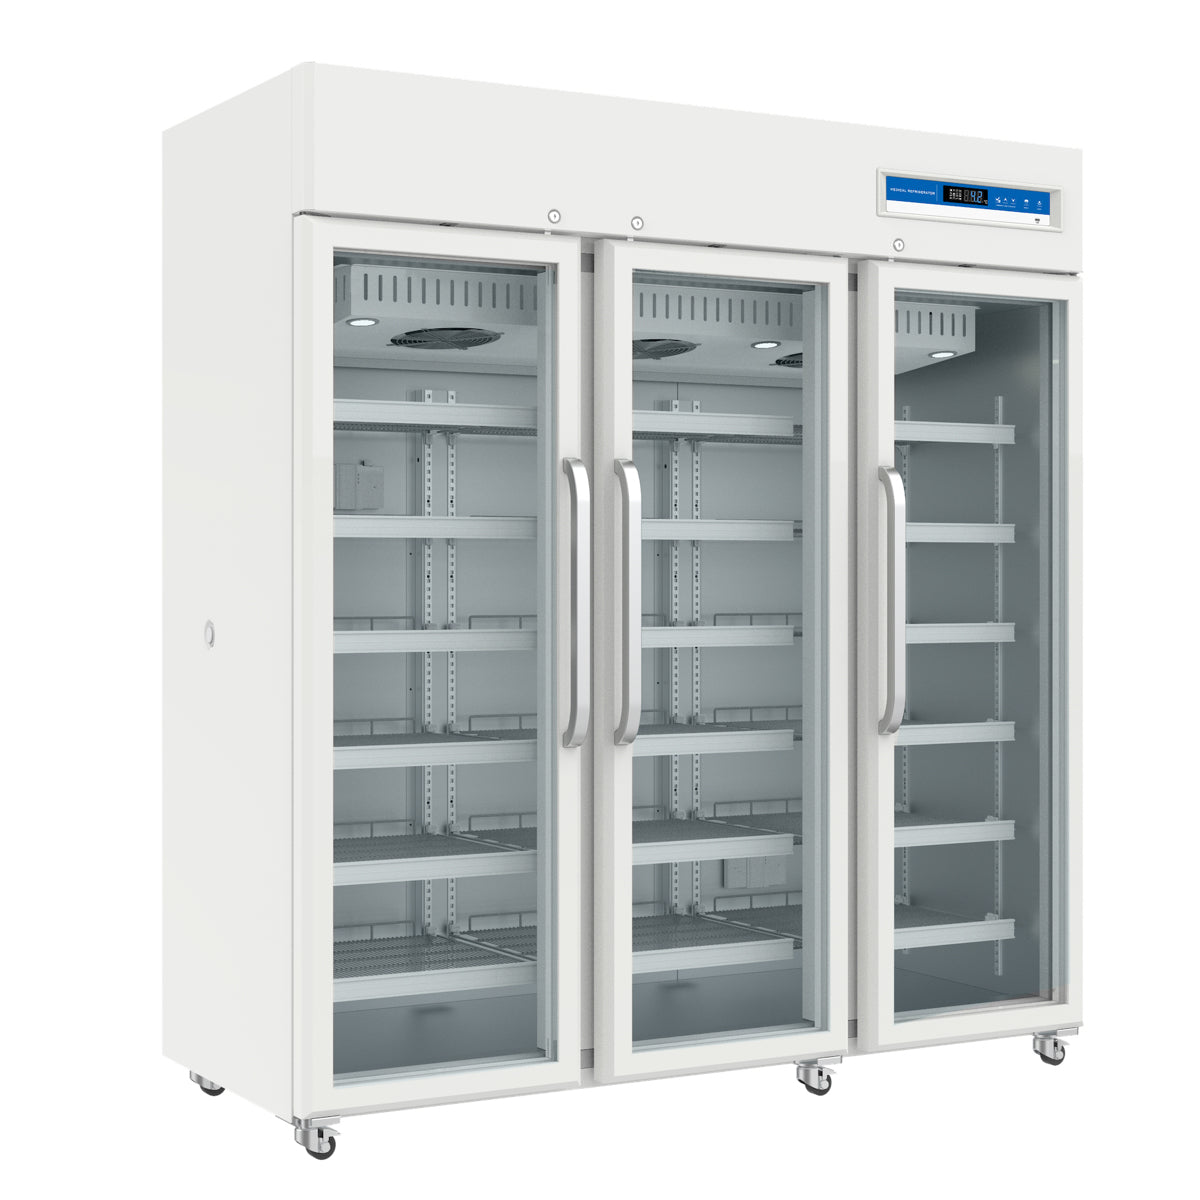 Jackscool Pharmacy Laboratory Refrigerators are the best solution for the storage of the most demanding pharmaceuticals, medicines, vaccines, and for other temperature-sensitive applications.